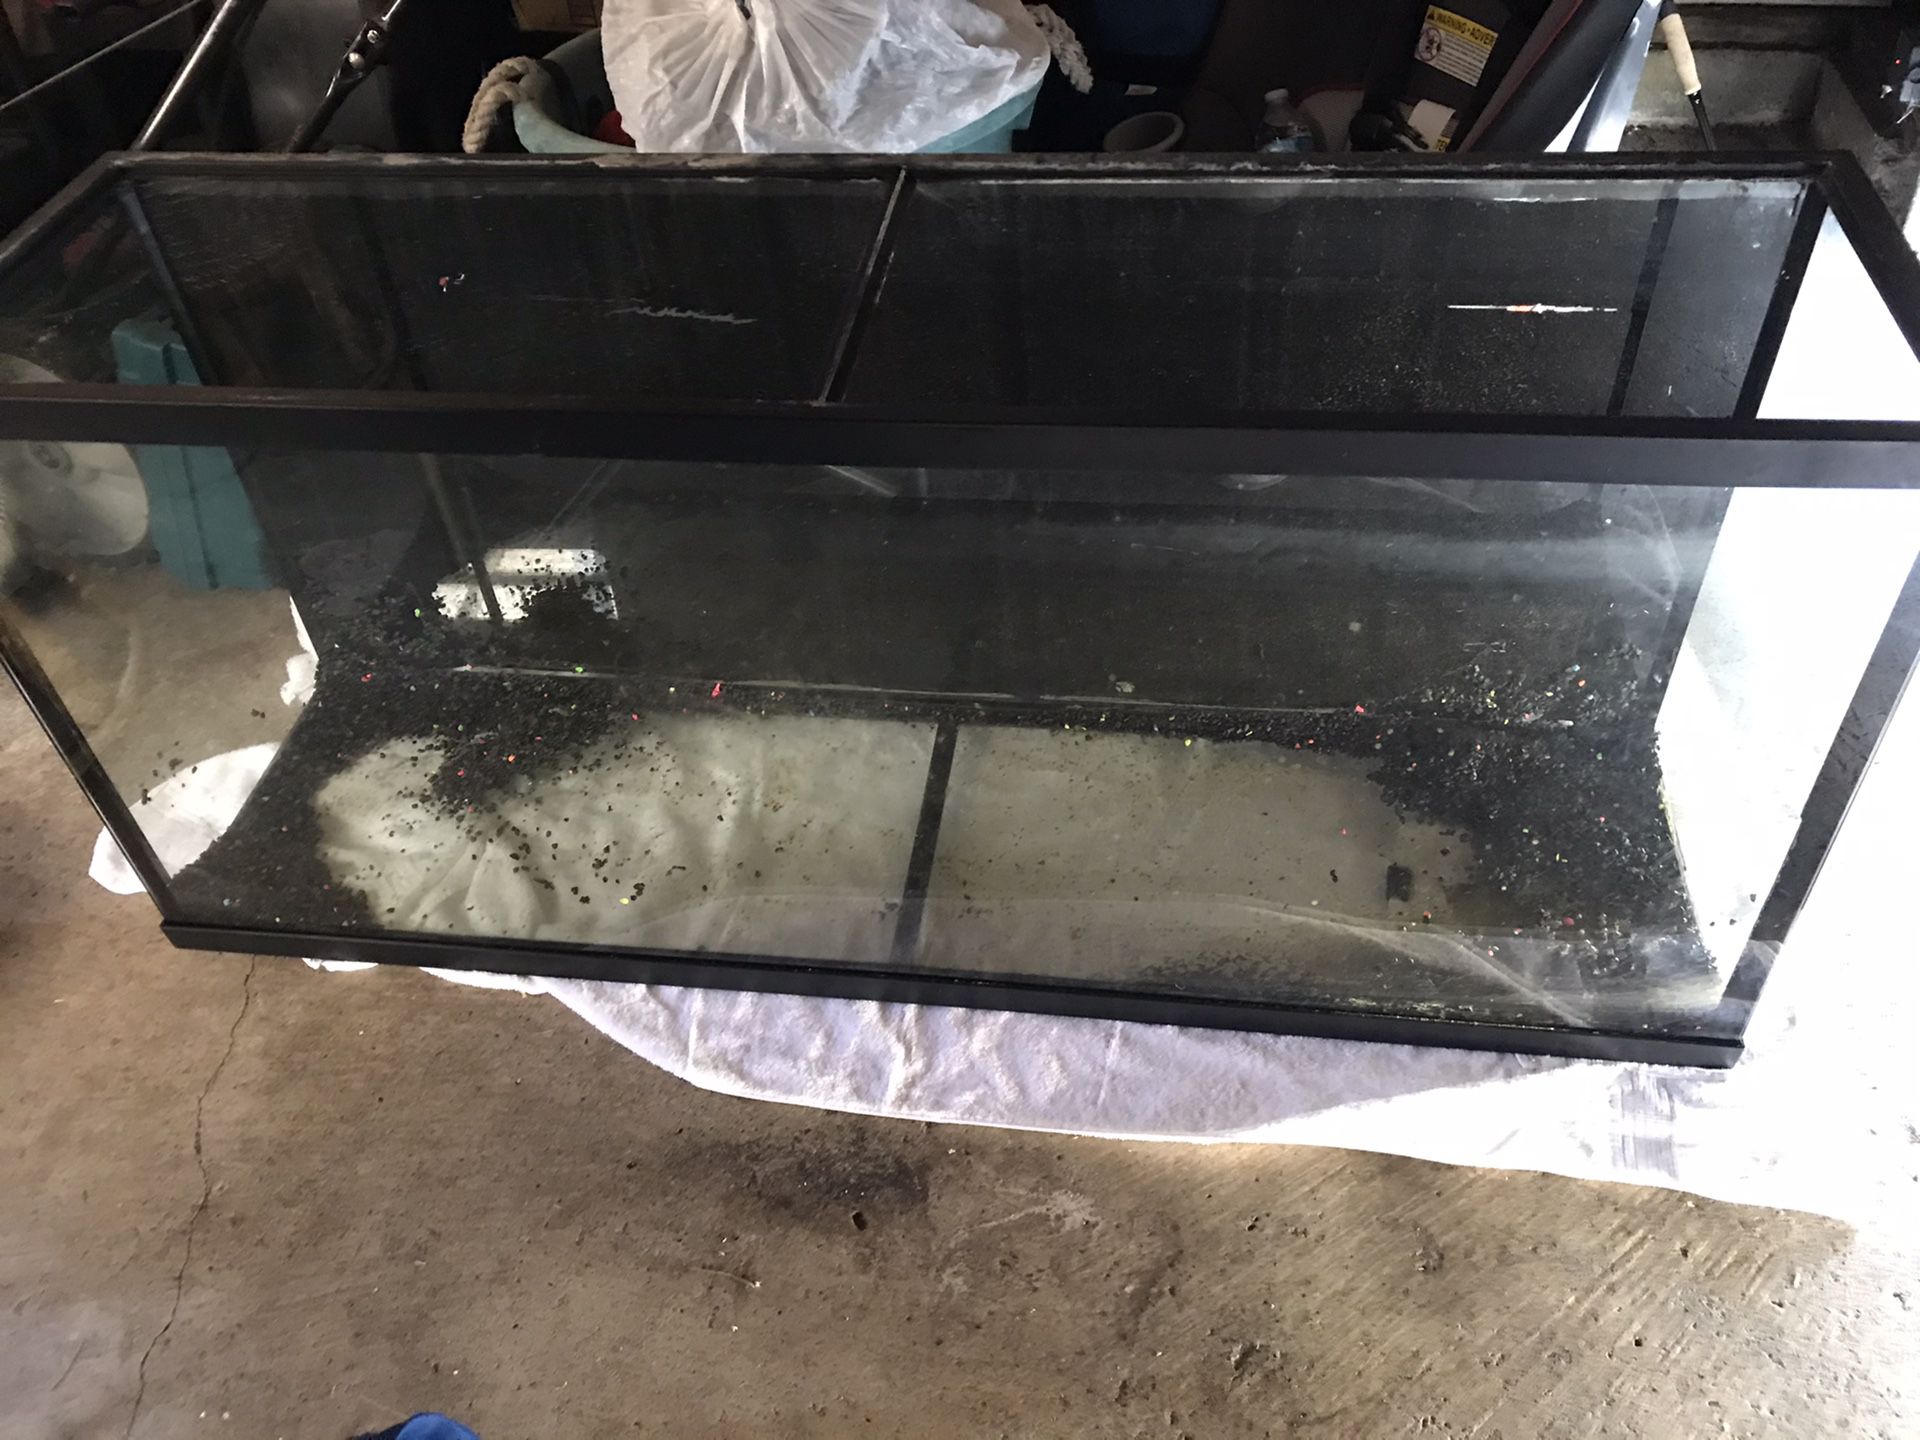 55 GALLON FISH TANK WITH BLACK METAL STAND